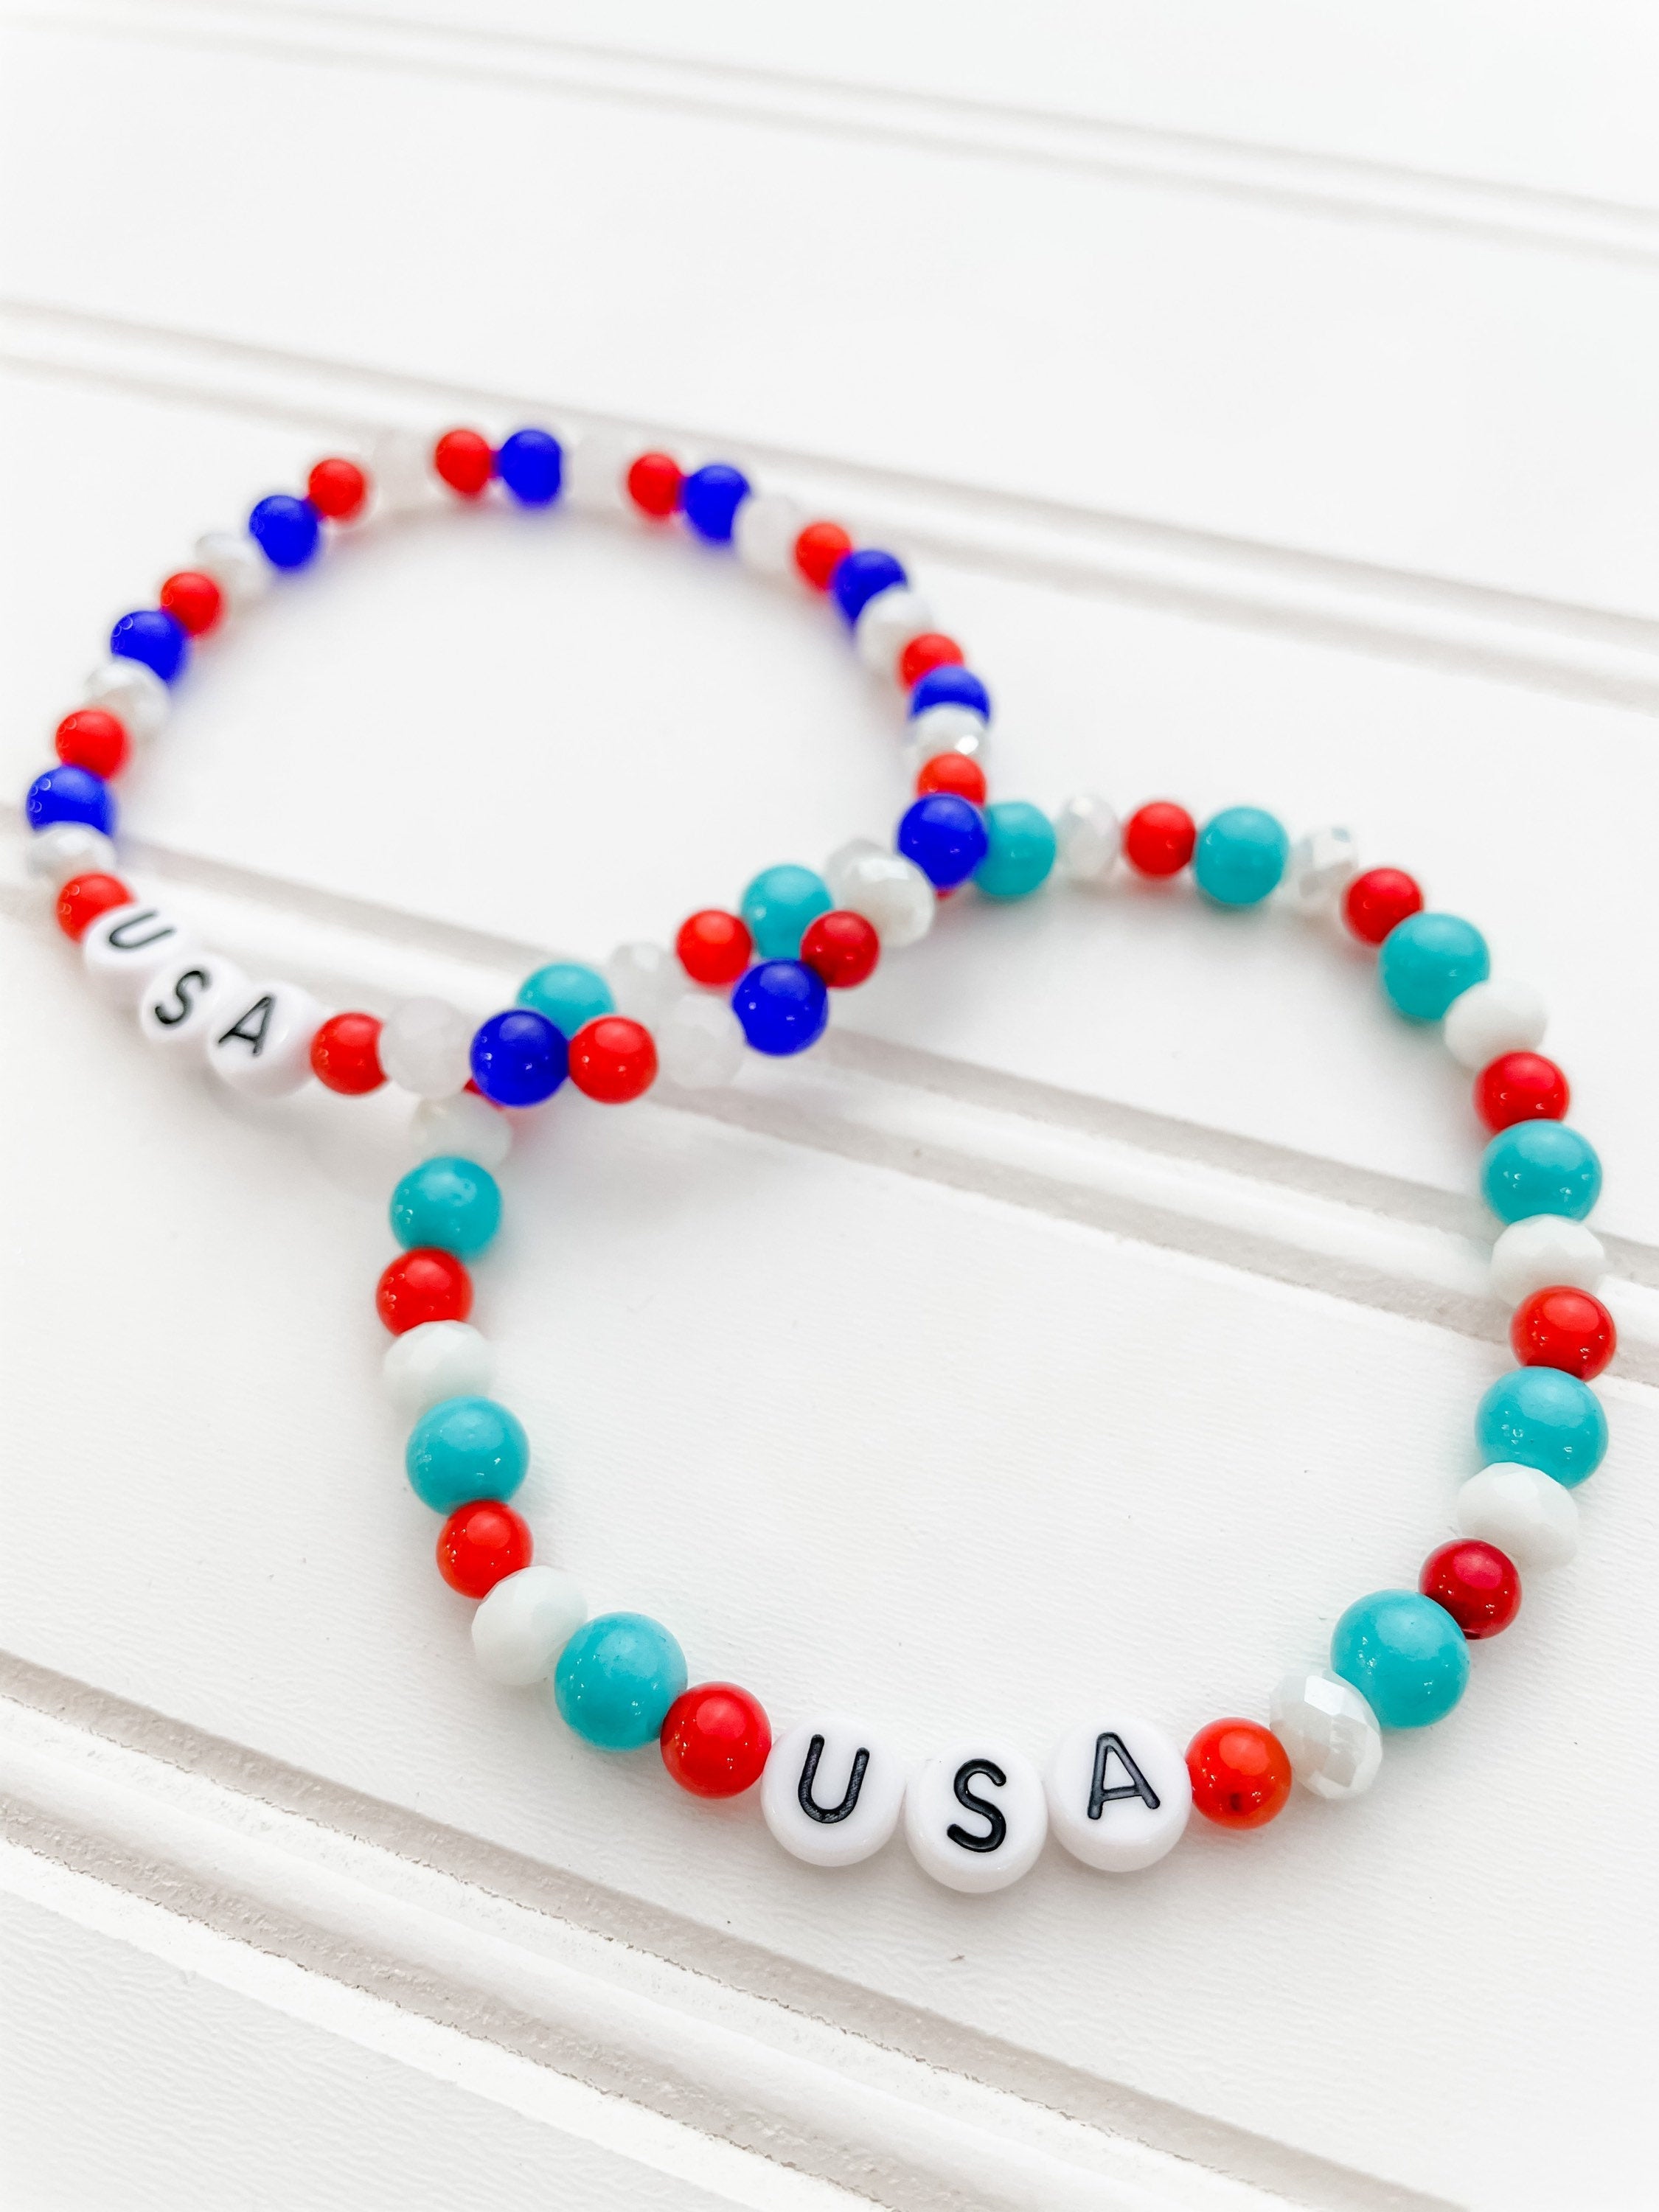 Buy Wettarn 120 Pcs American Flag Silicone Bracelet 4th of July Silicone  Wristband Bracelets Patriotic Wristbands Fourth of July Bracelets Red White  Blue Bracelet for Independence Day Favors School Gifts Online at